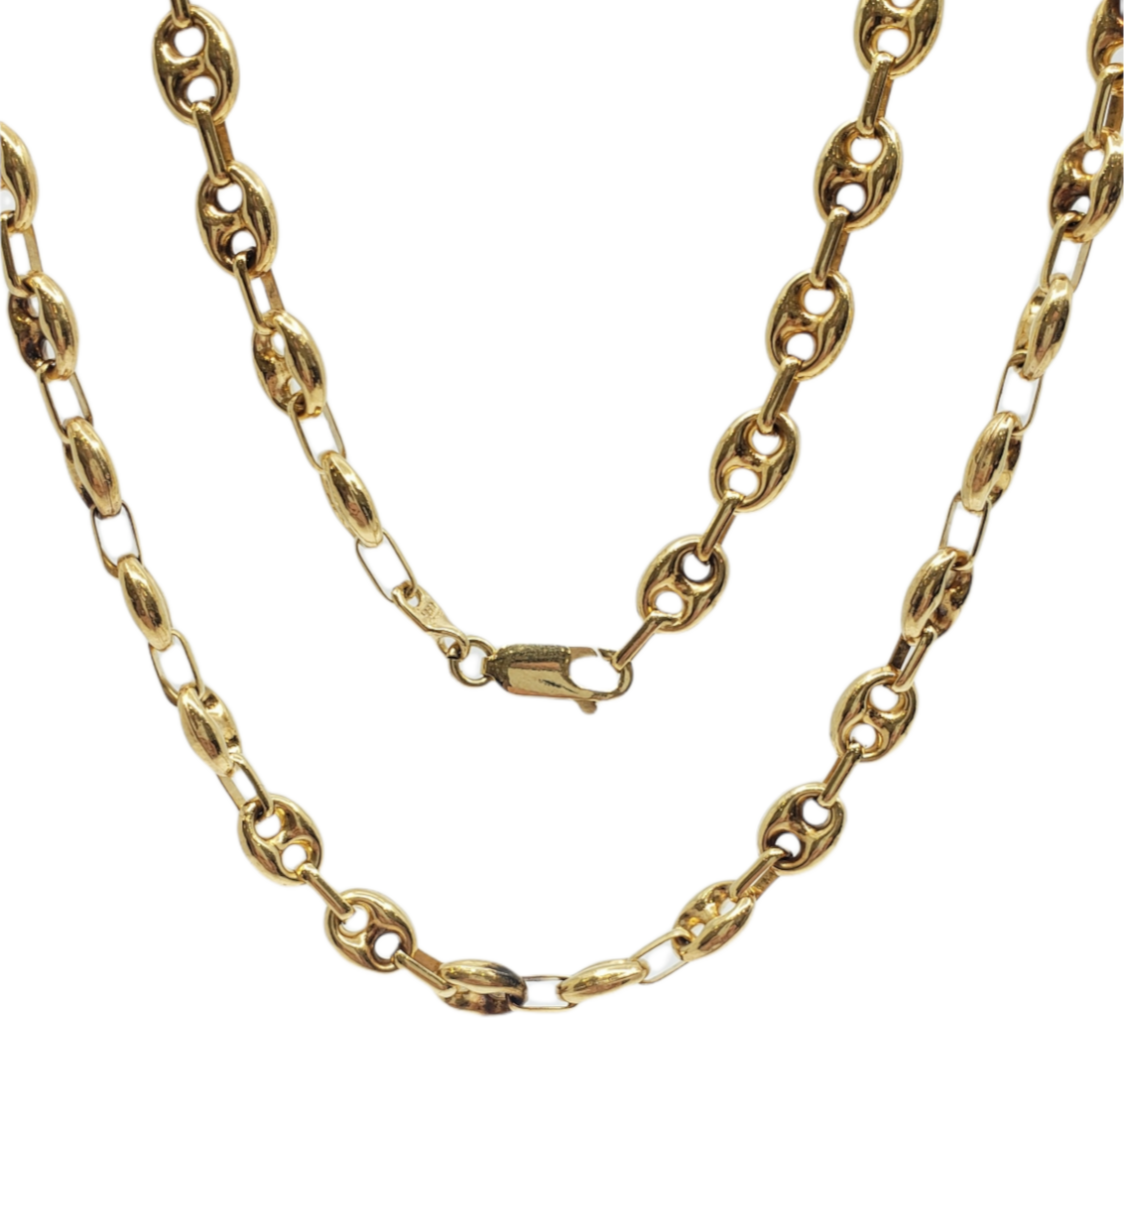 10K Yellow Gold 6.1mm Gucci Style Chain with Lobster Clasp - 20 Inches